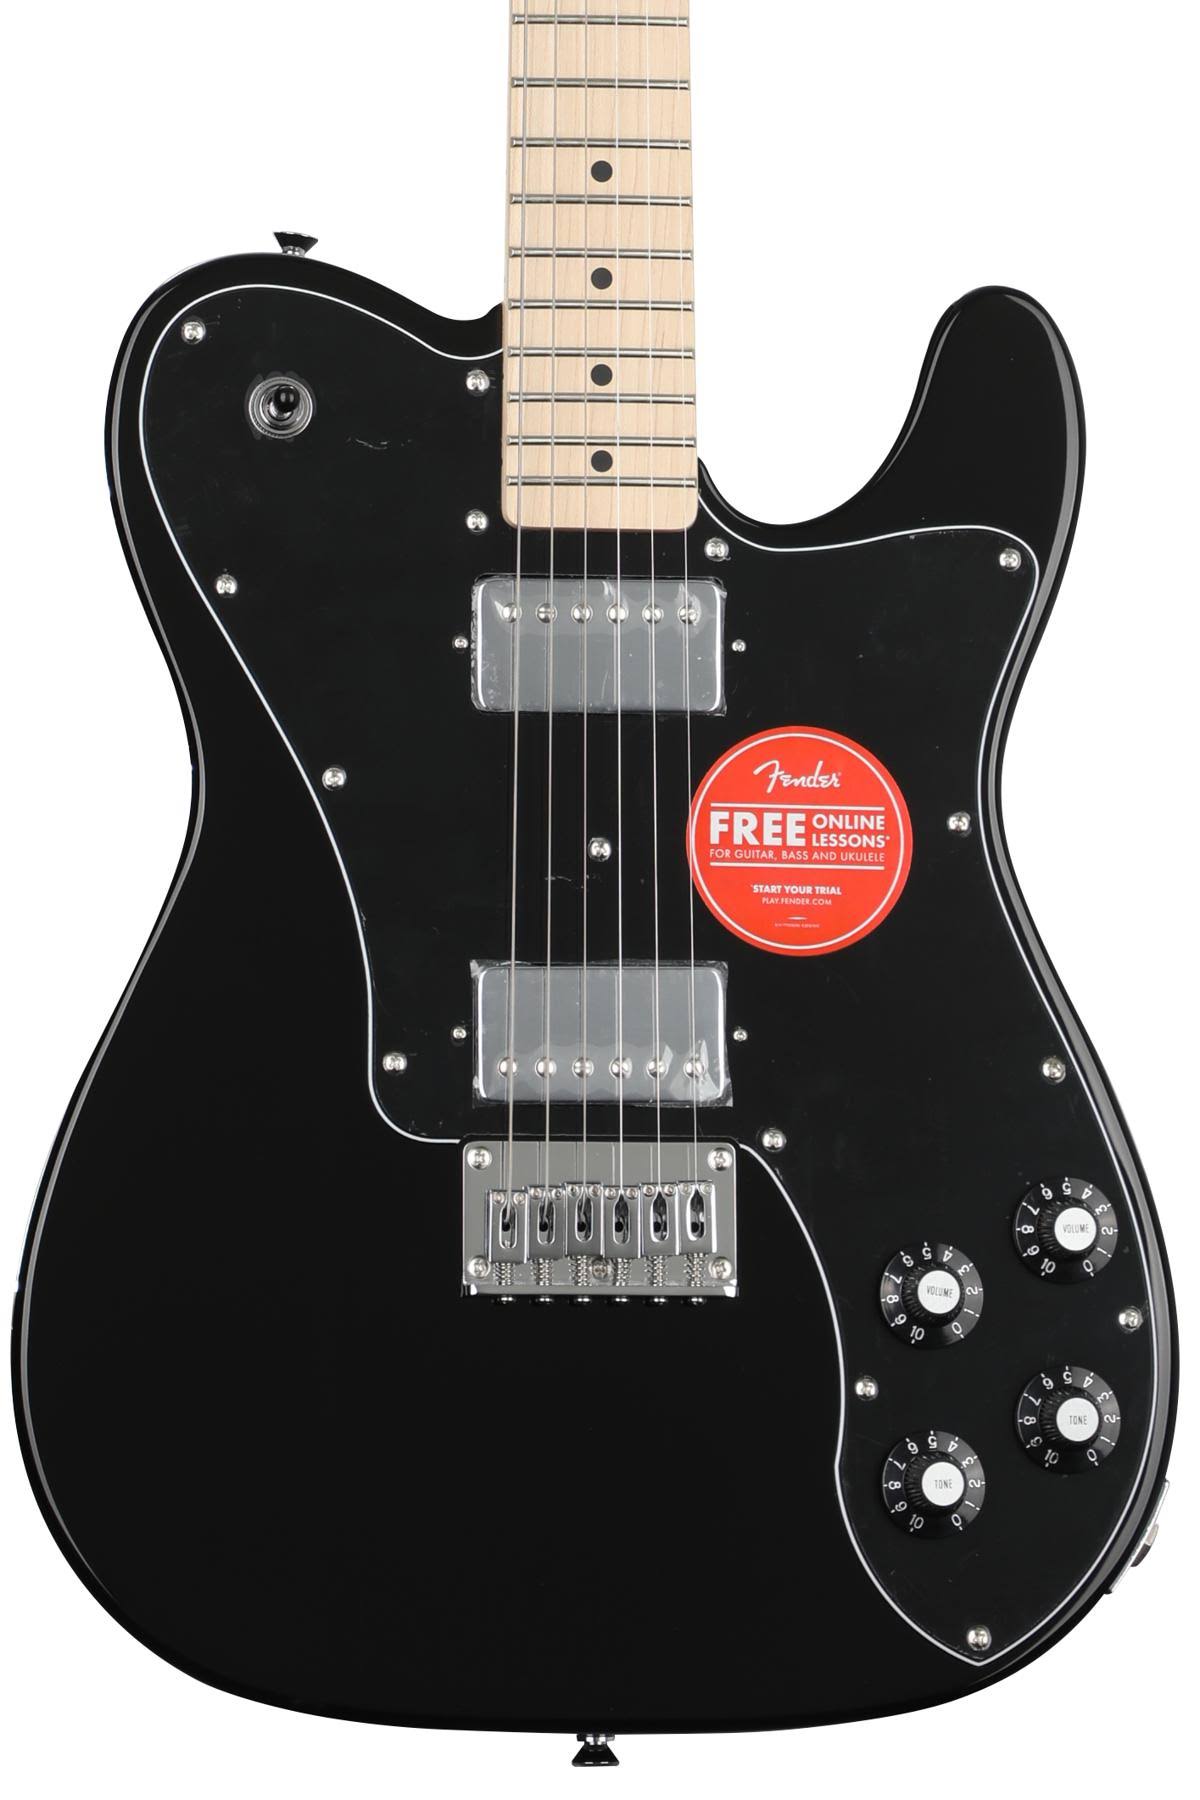 Squier Affinity Series Telecaster Deluxe Electric Guitar - Black - Maple Fingerboard